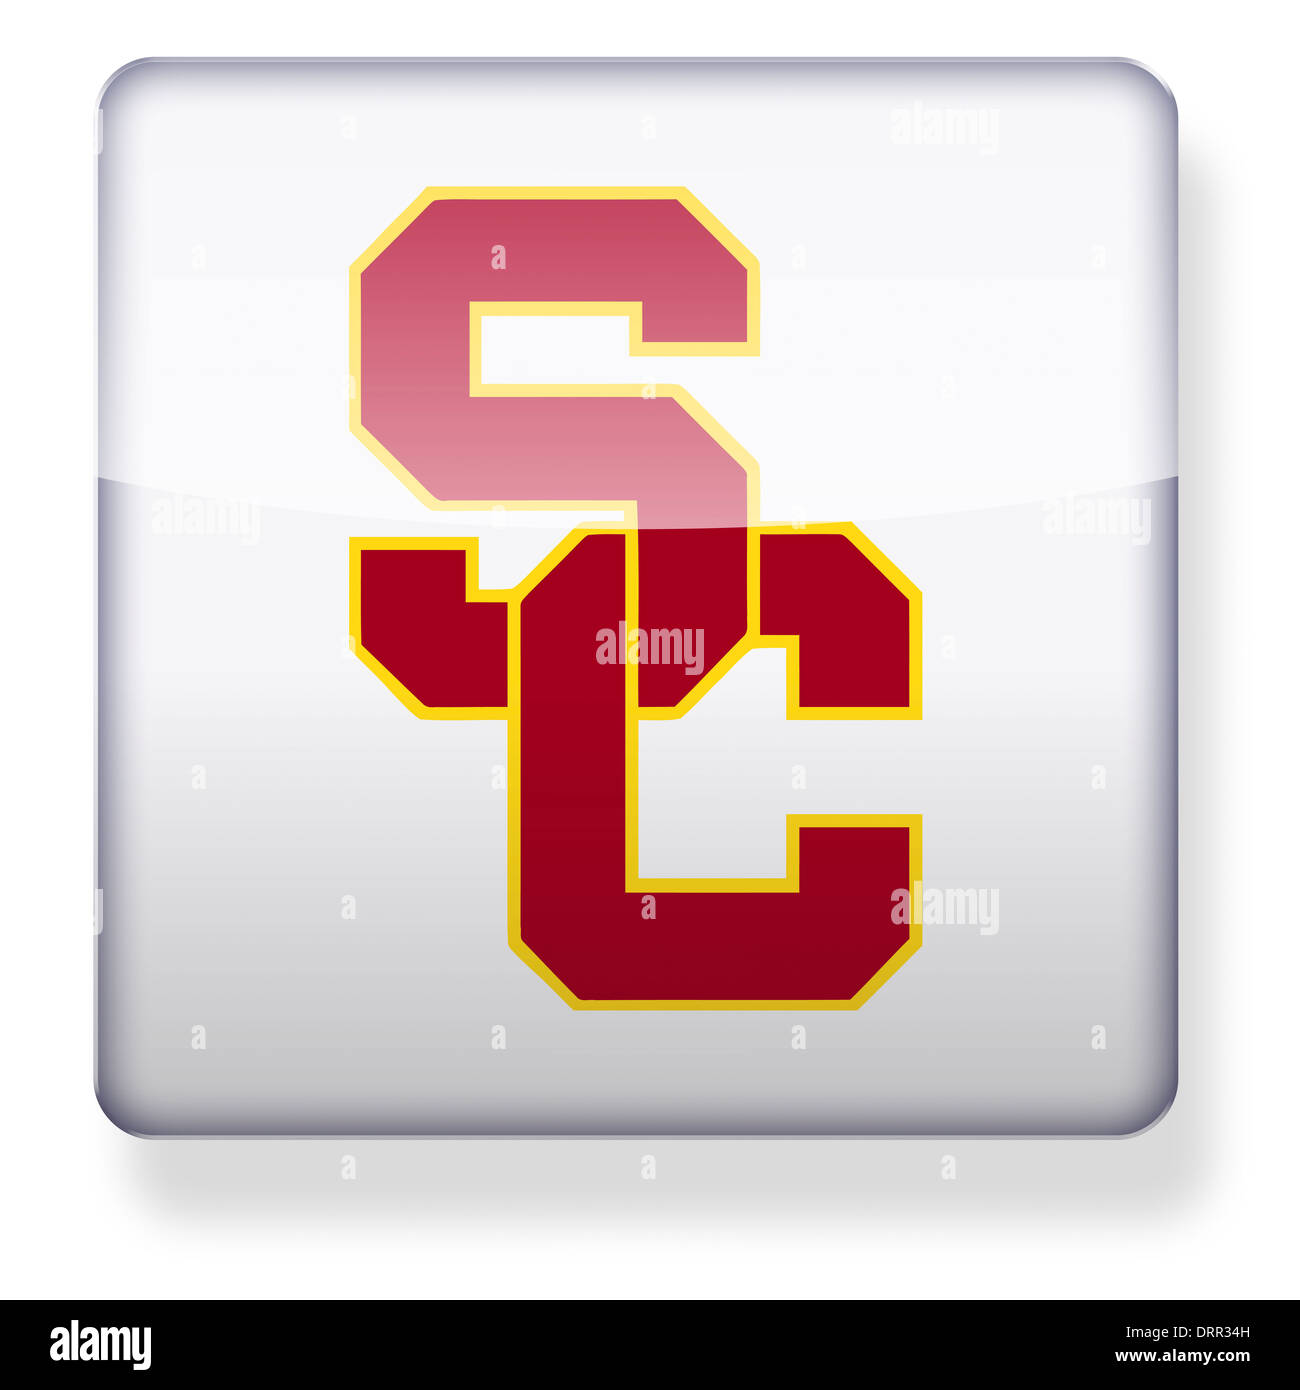 USC Trojans US college football logo as an app icon. Clipping path included. Stock Photo